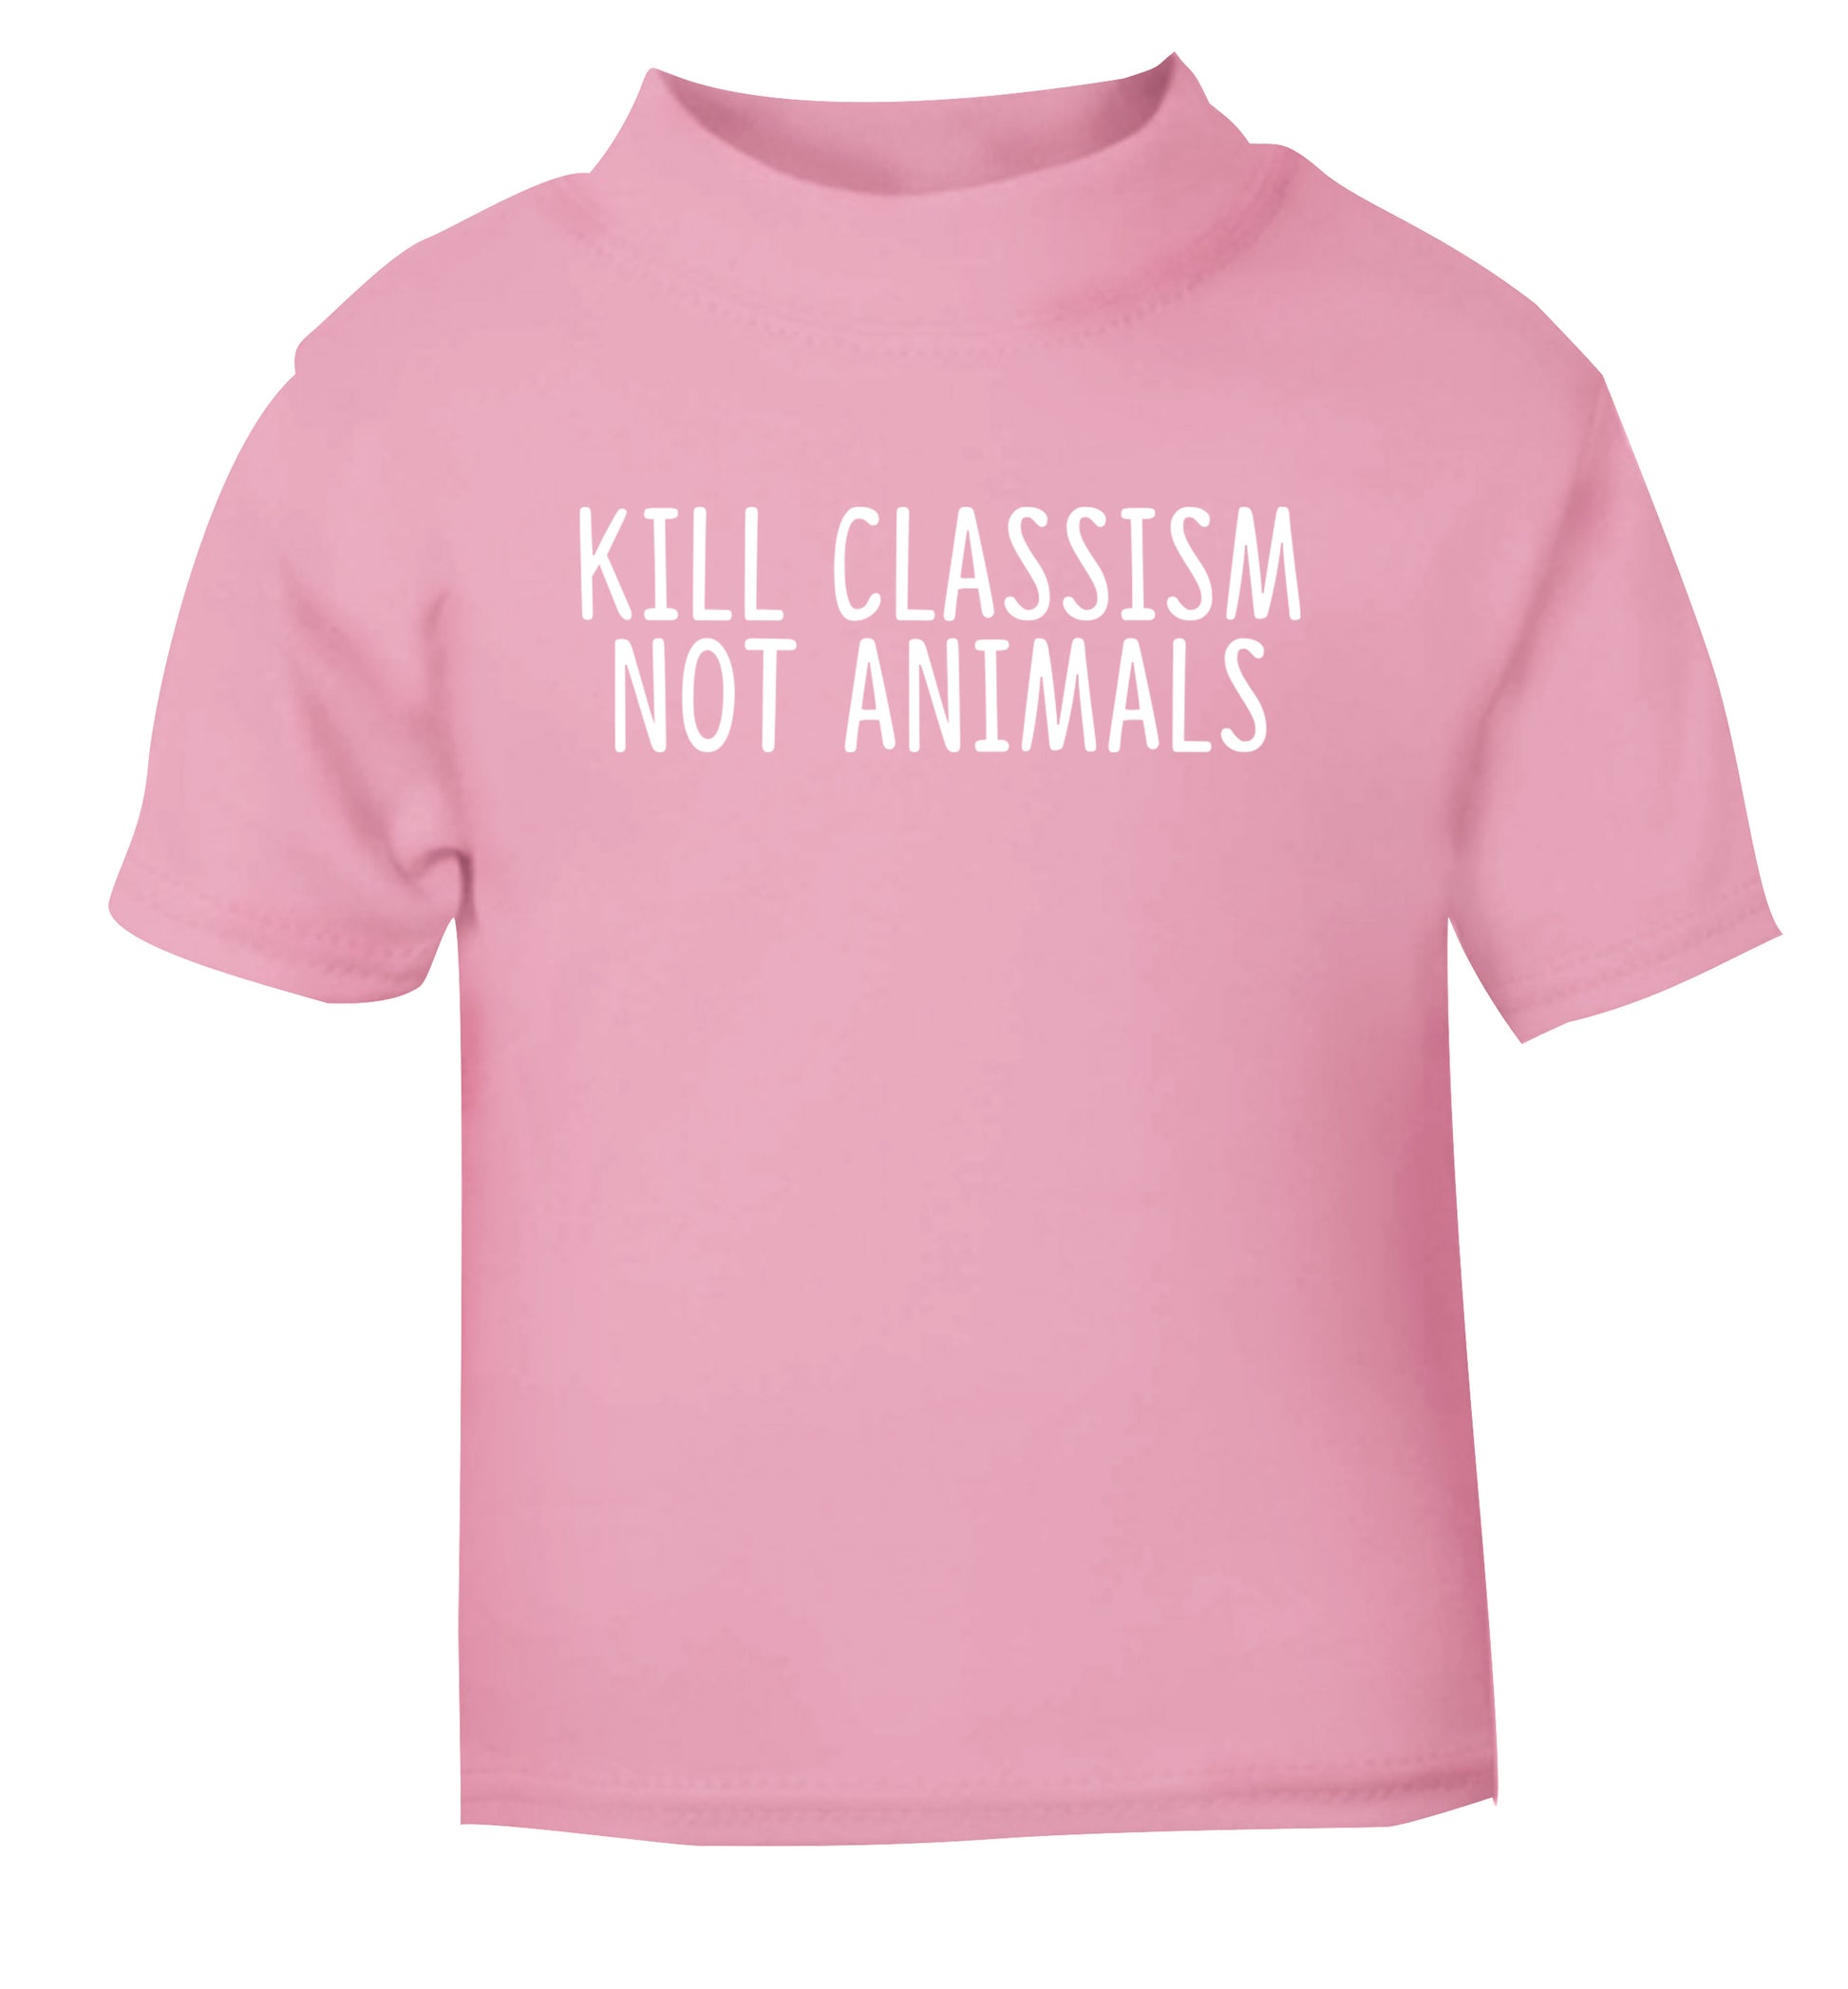 Kill Classism Not Animals light pink Baby Toddler Tshirt 2 Years